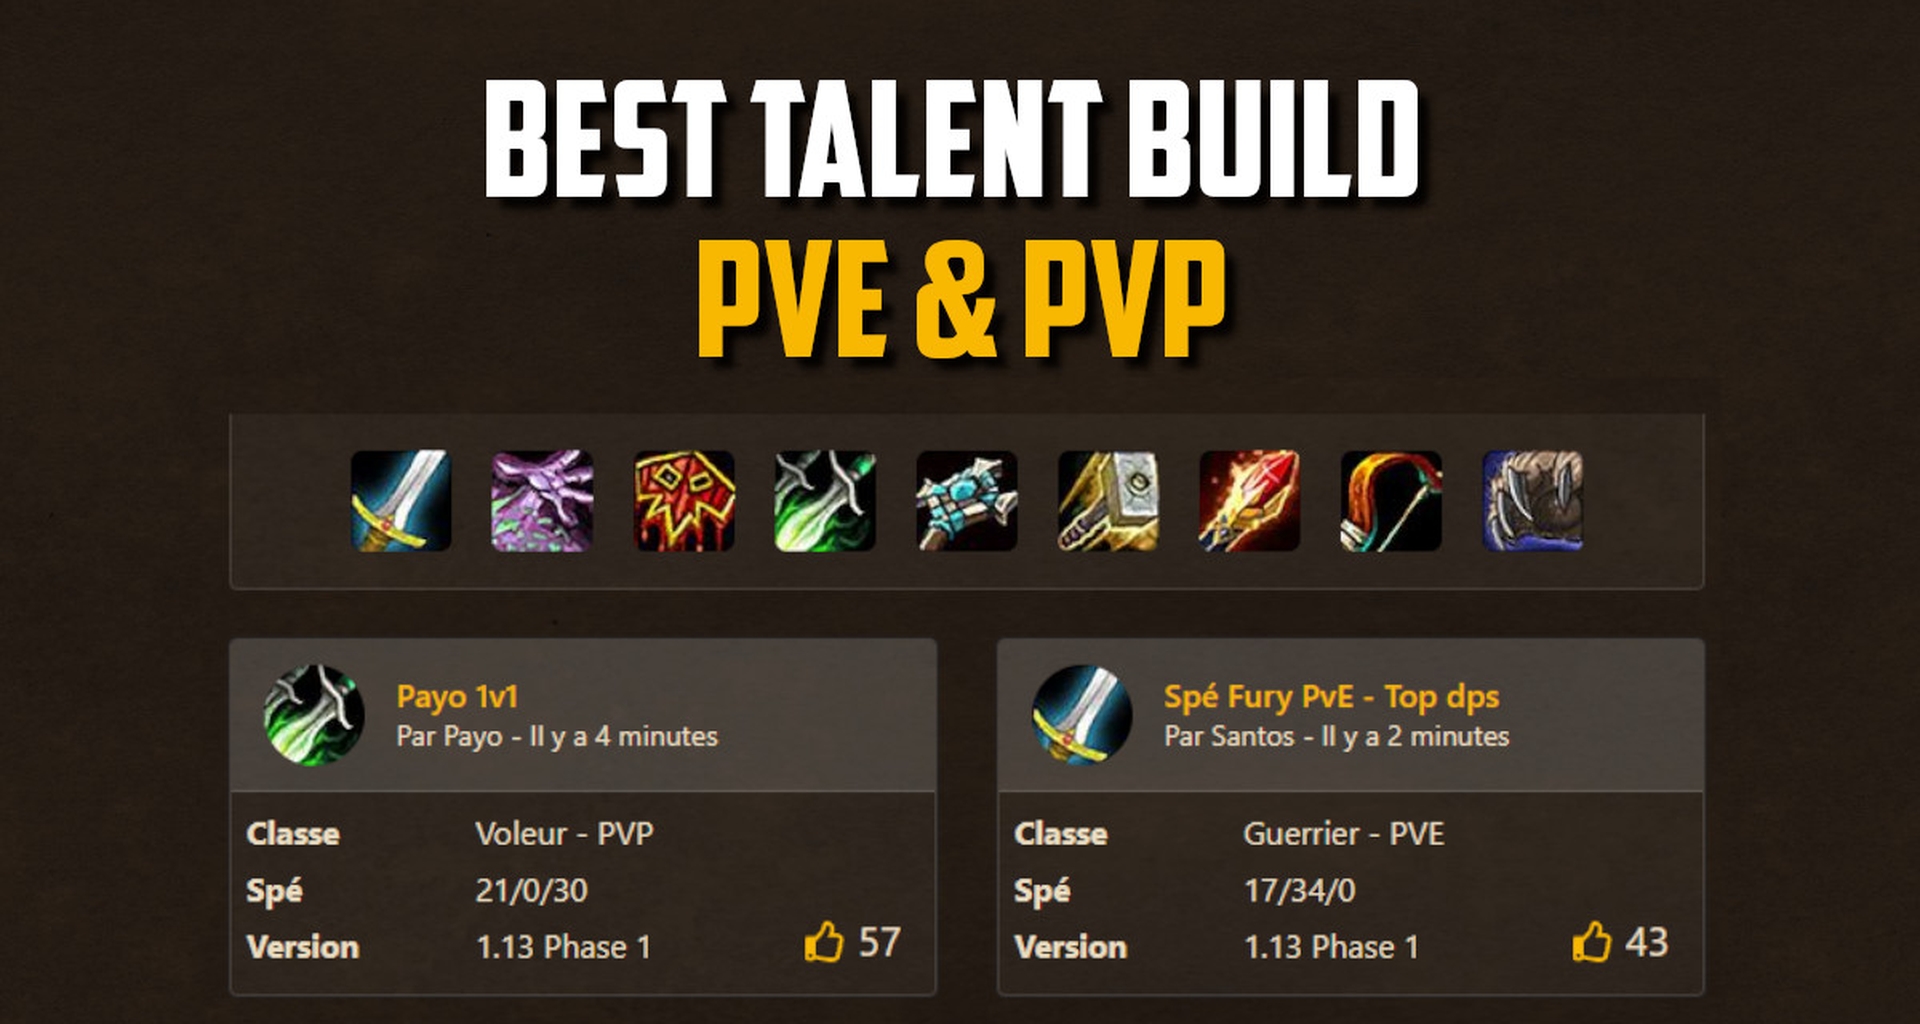 TALENTS YOU WANT TO GO FOR IN A PVE BUILD